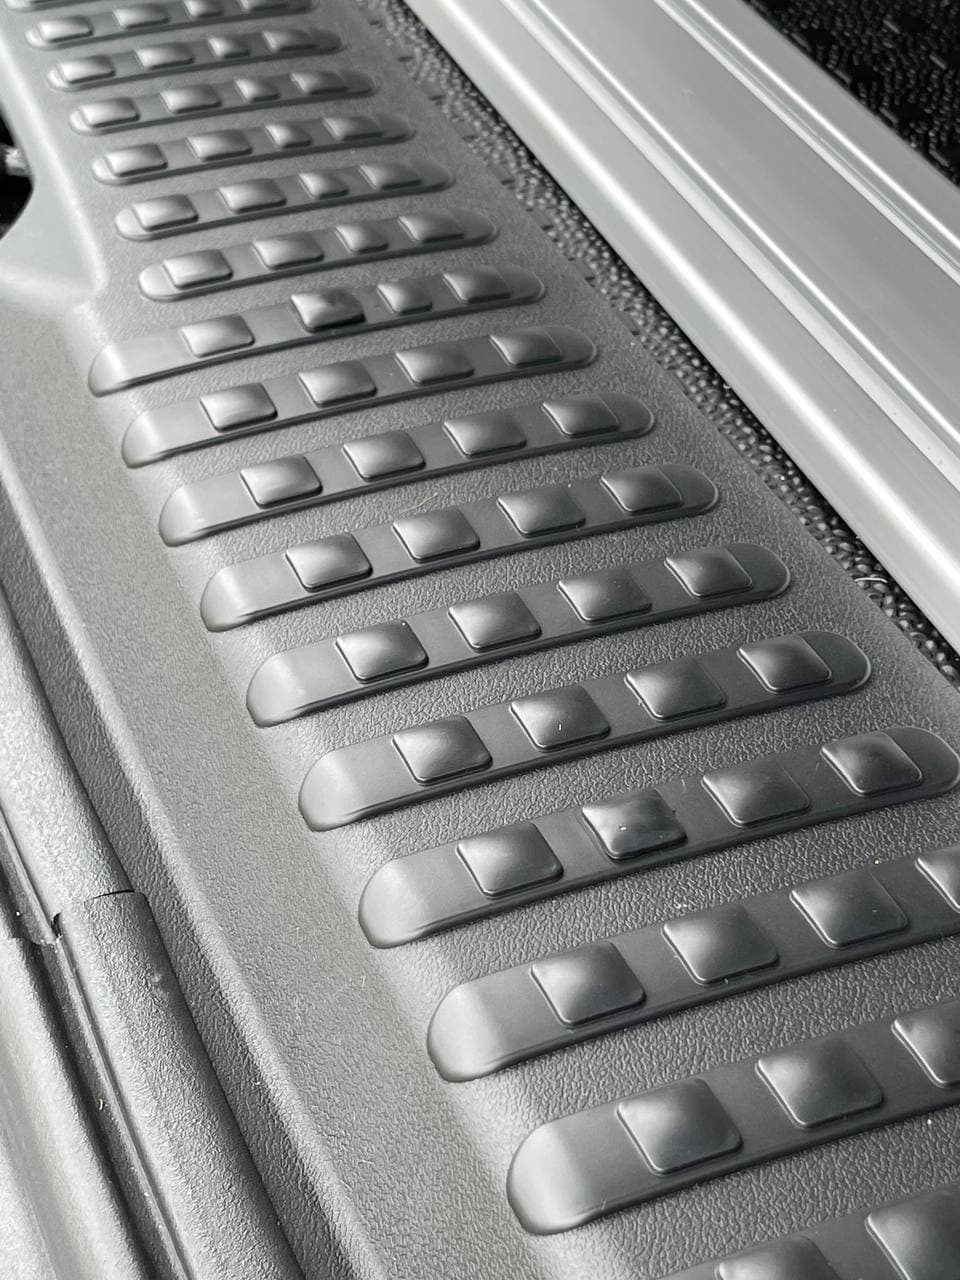 VW T5, T5.1 V3 Tailgate Rear Threshold Cover Campervan Conversion Parts Including Screws and Caps